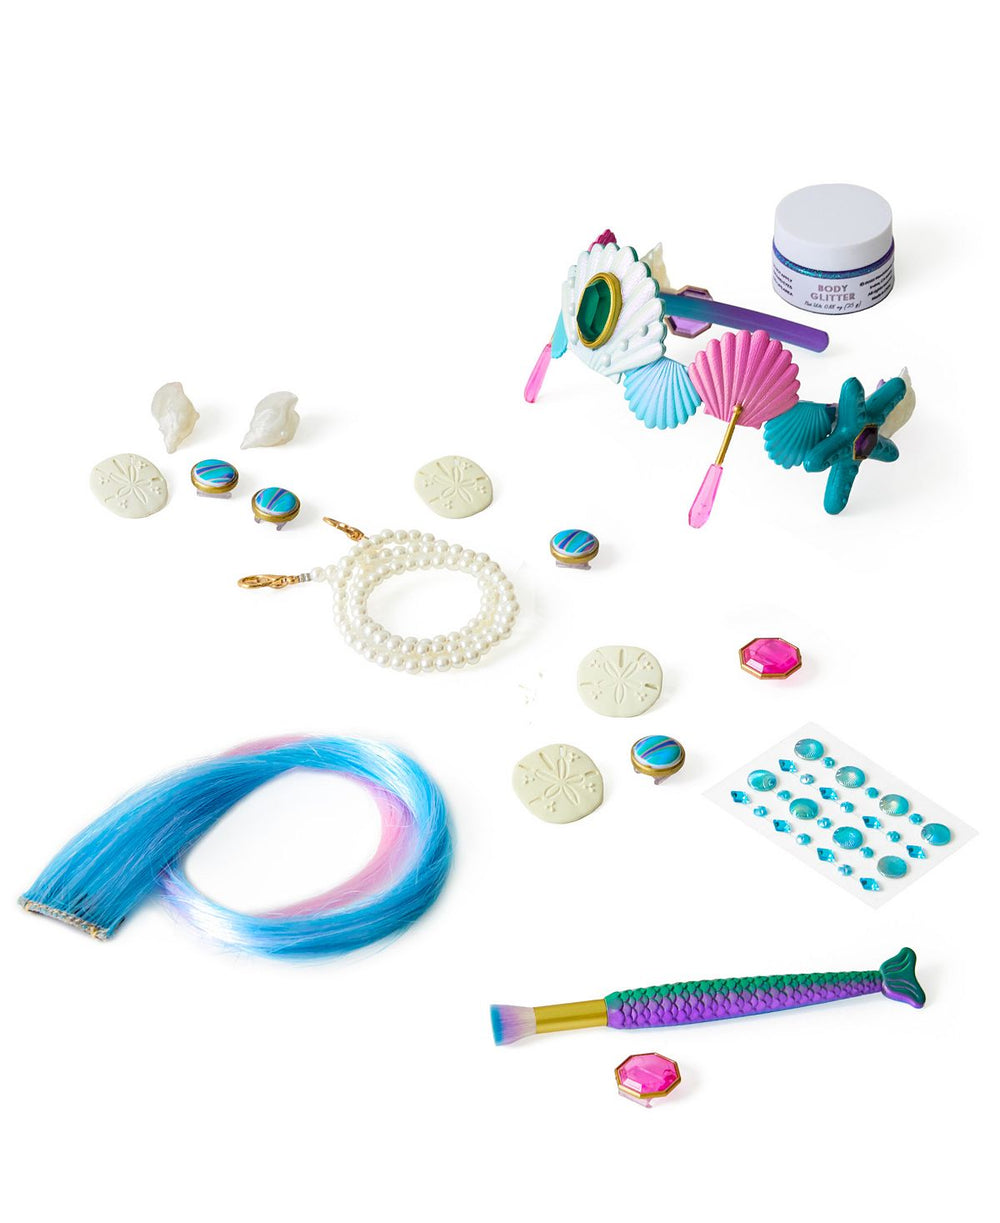 Geoffrey's Toy Box 32-Piece Mermaid Social Star Accessory Set - Exclusive to Macy's